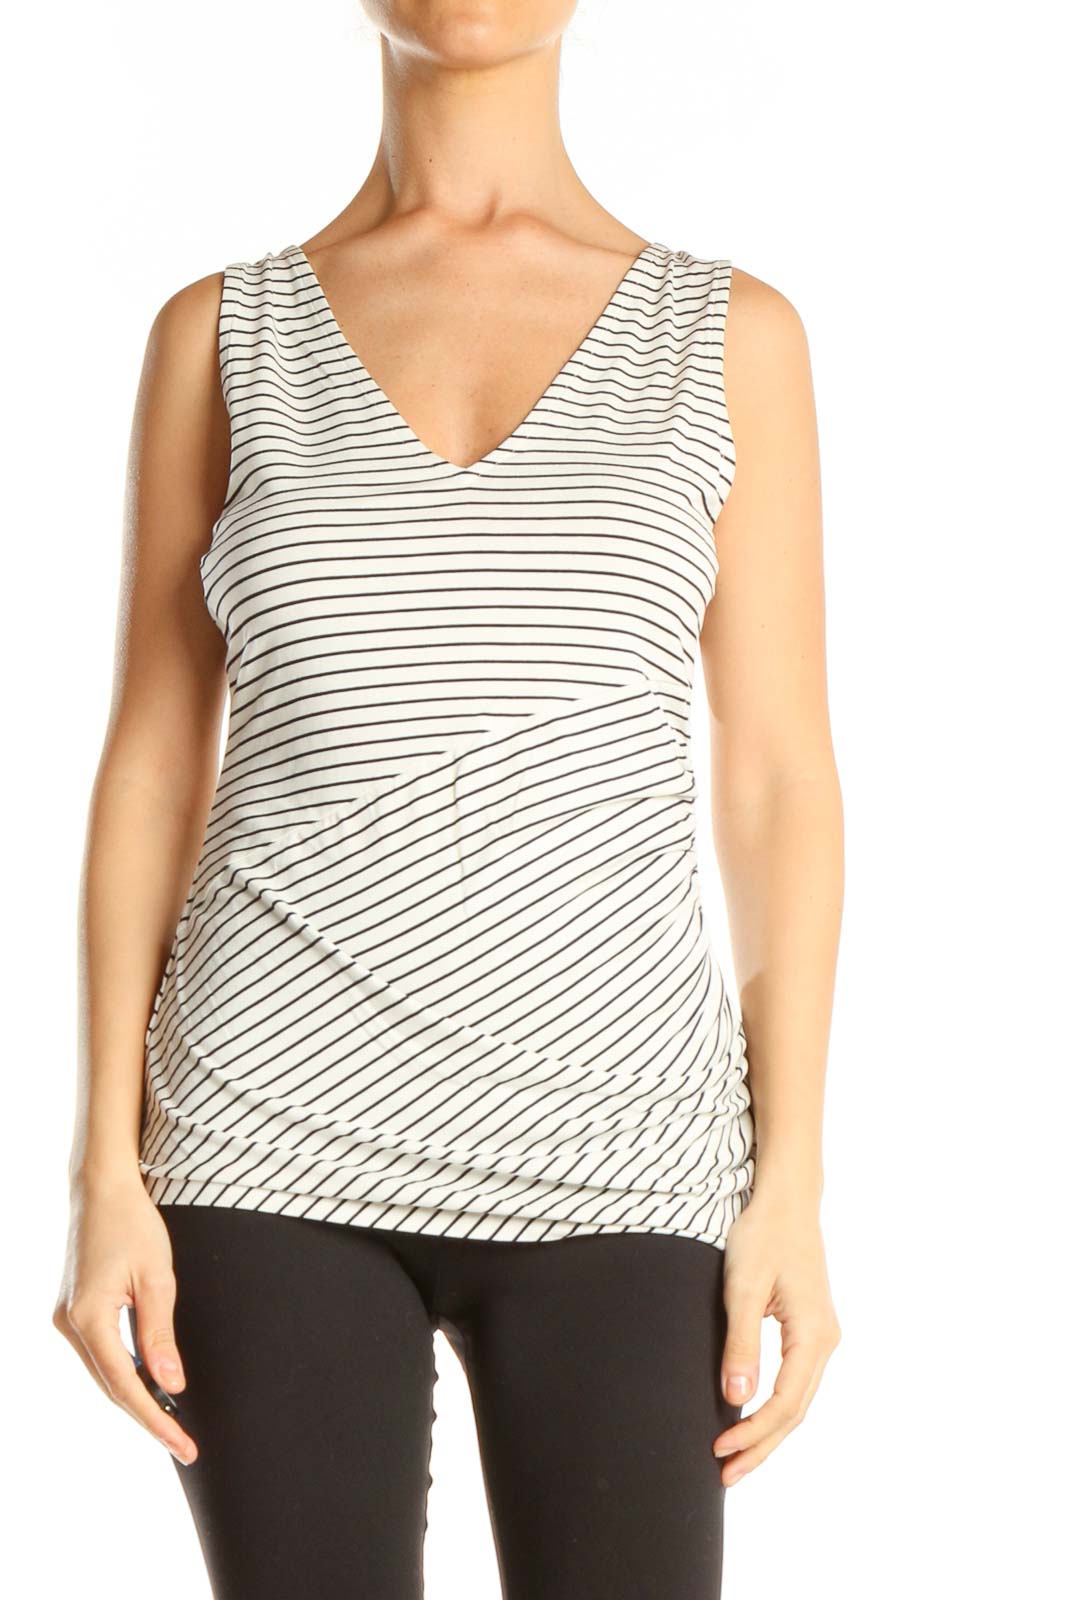 White Striped Top Front